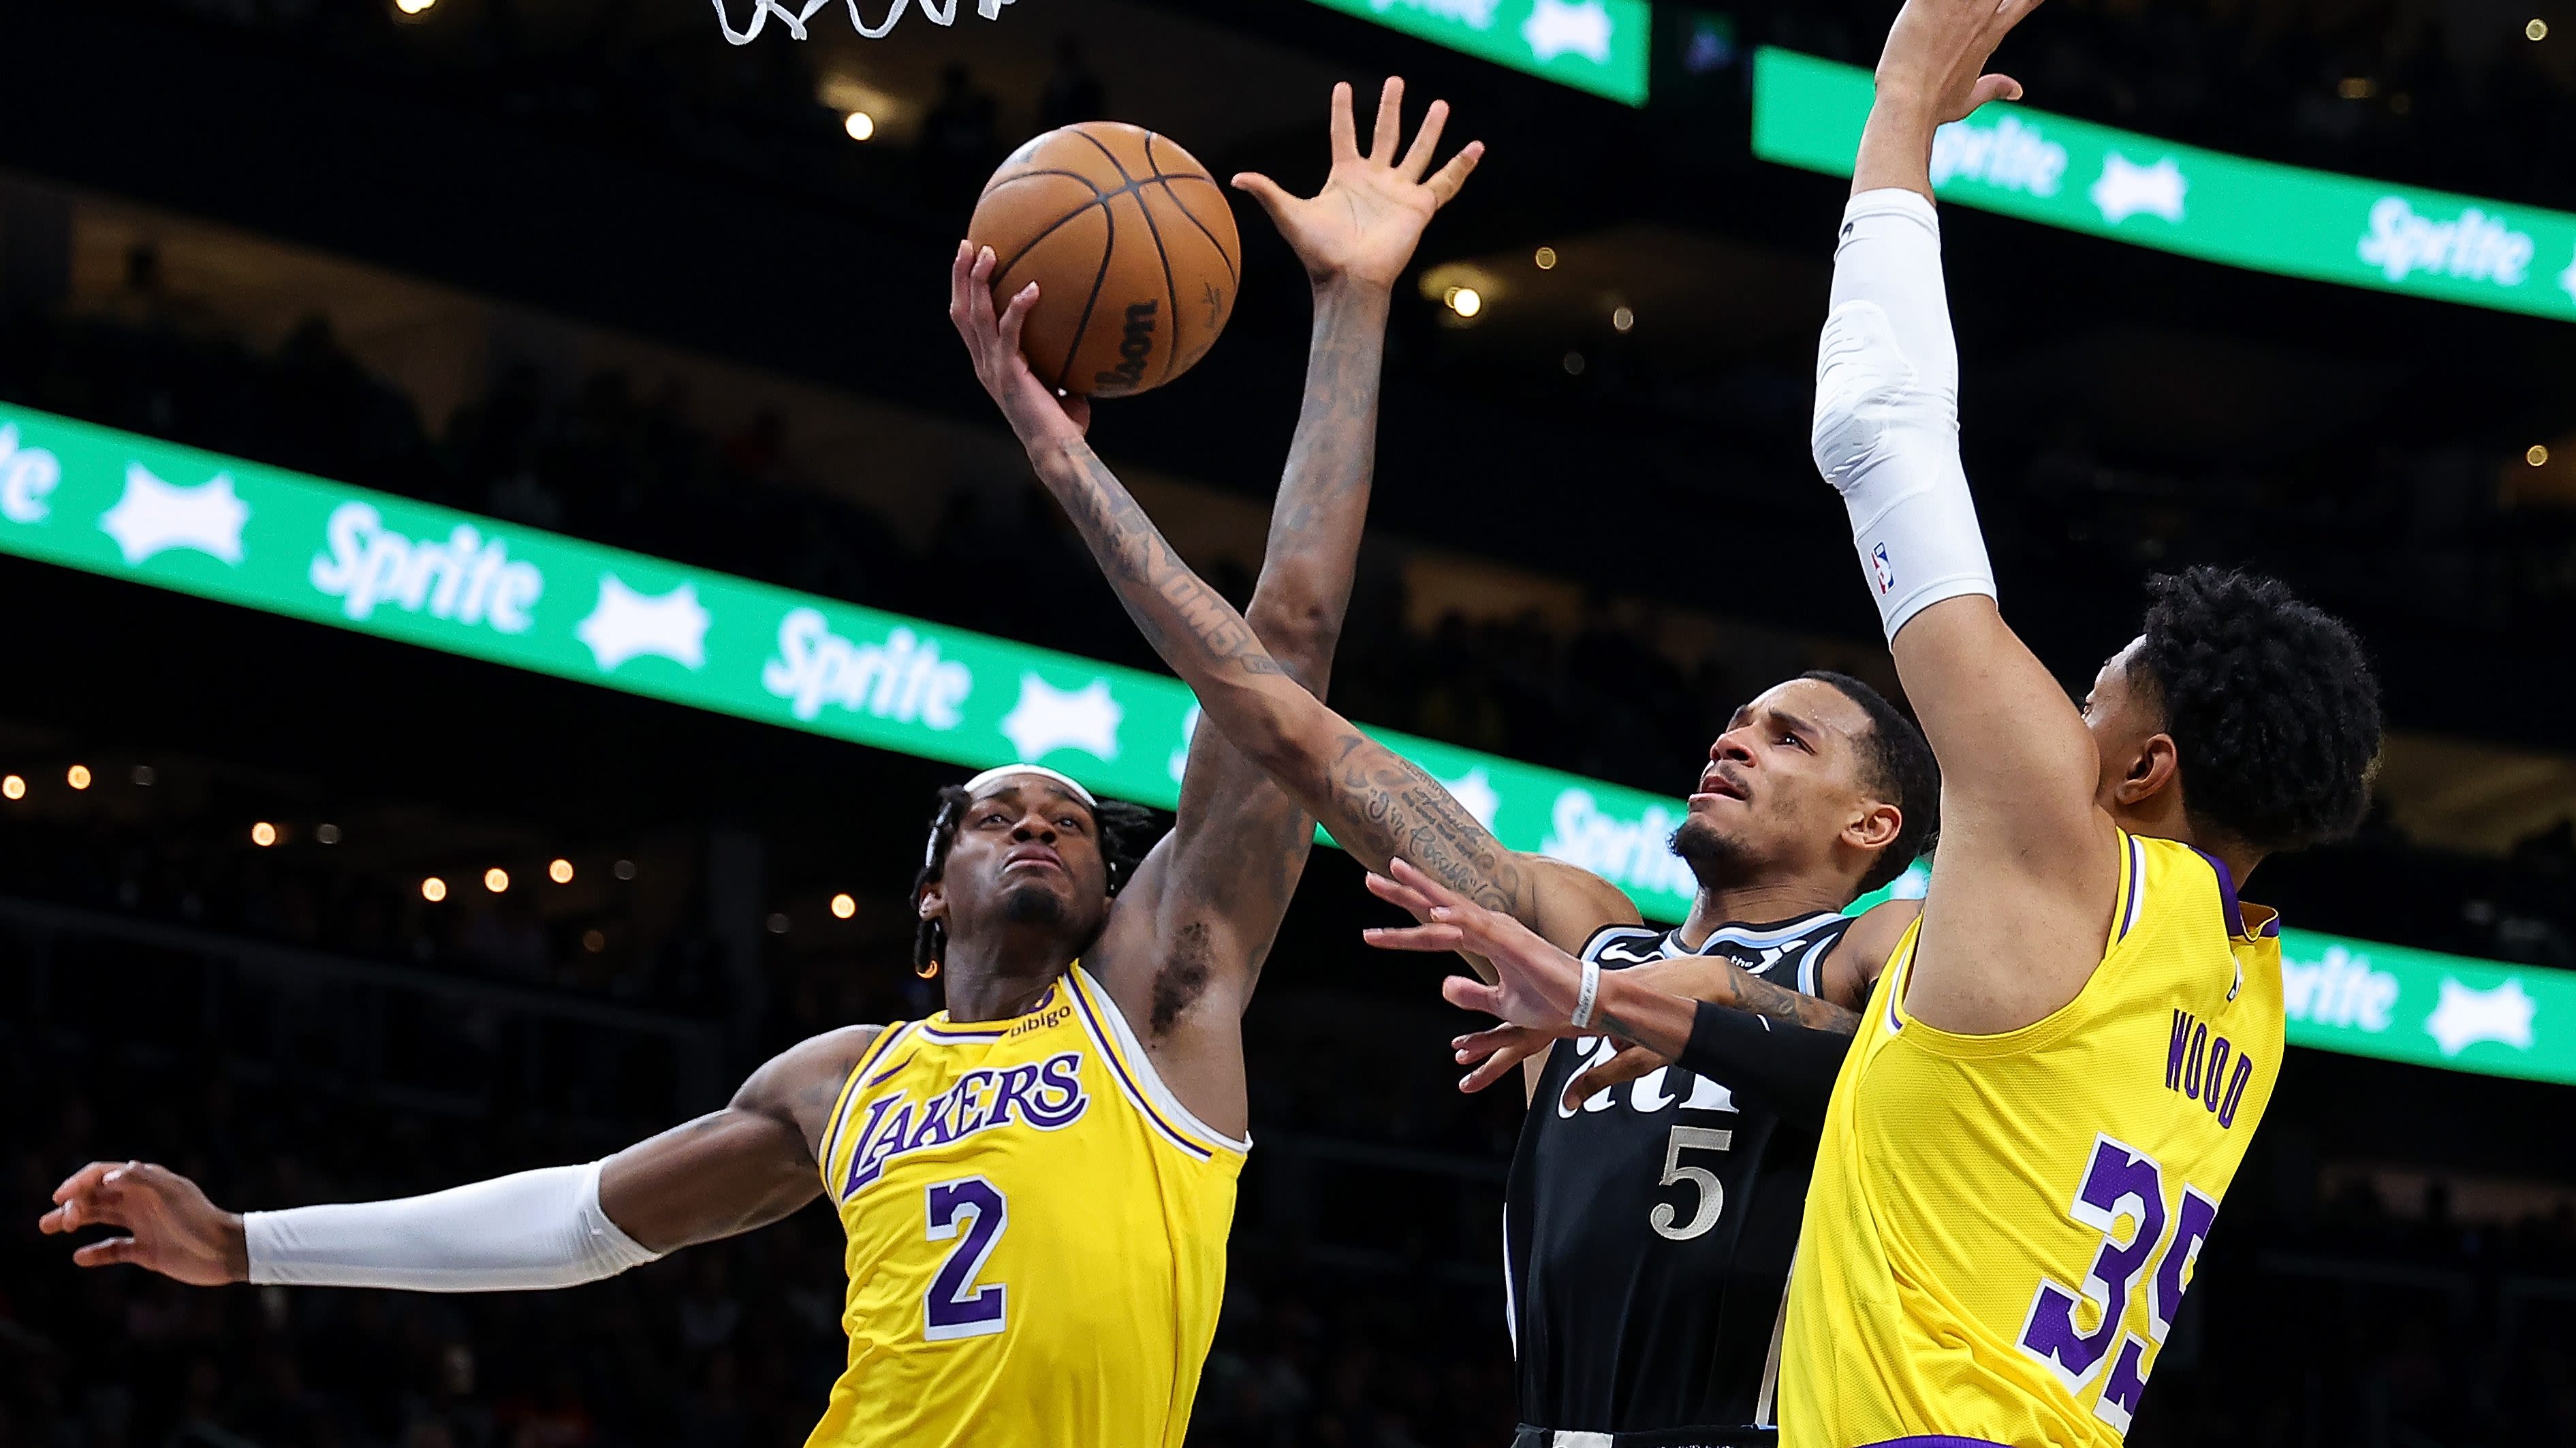 Lakers Expected to ‘Make a Push’ for $114 Million Star Guard